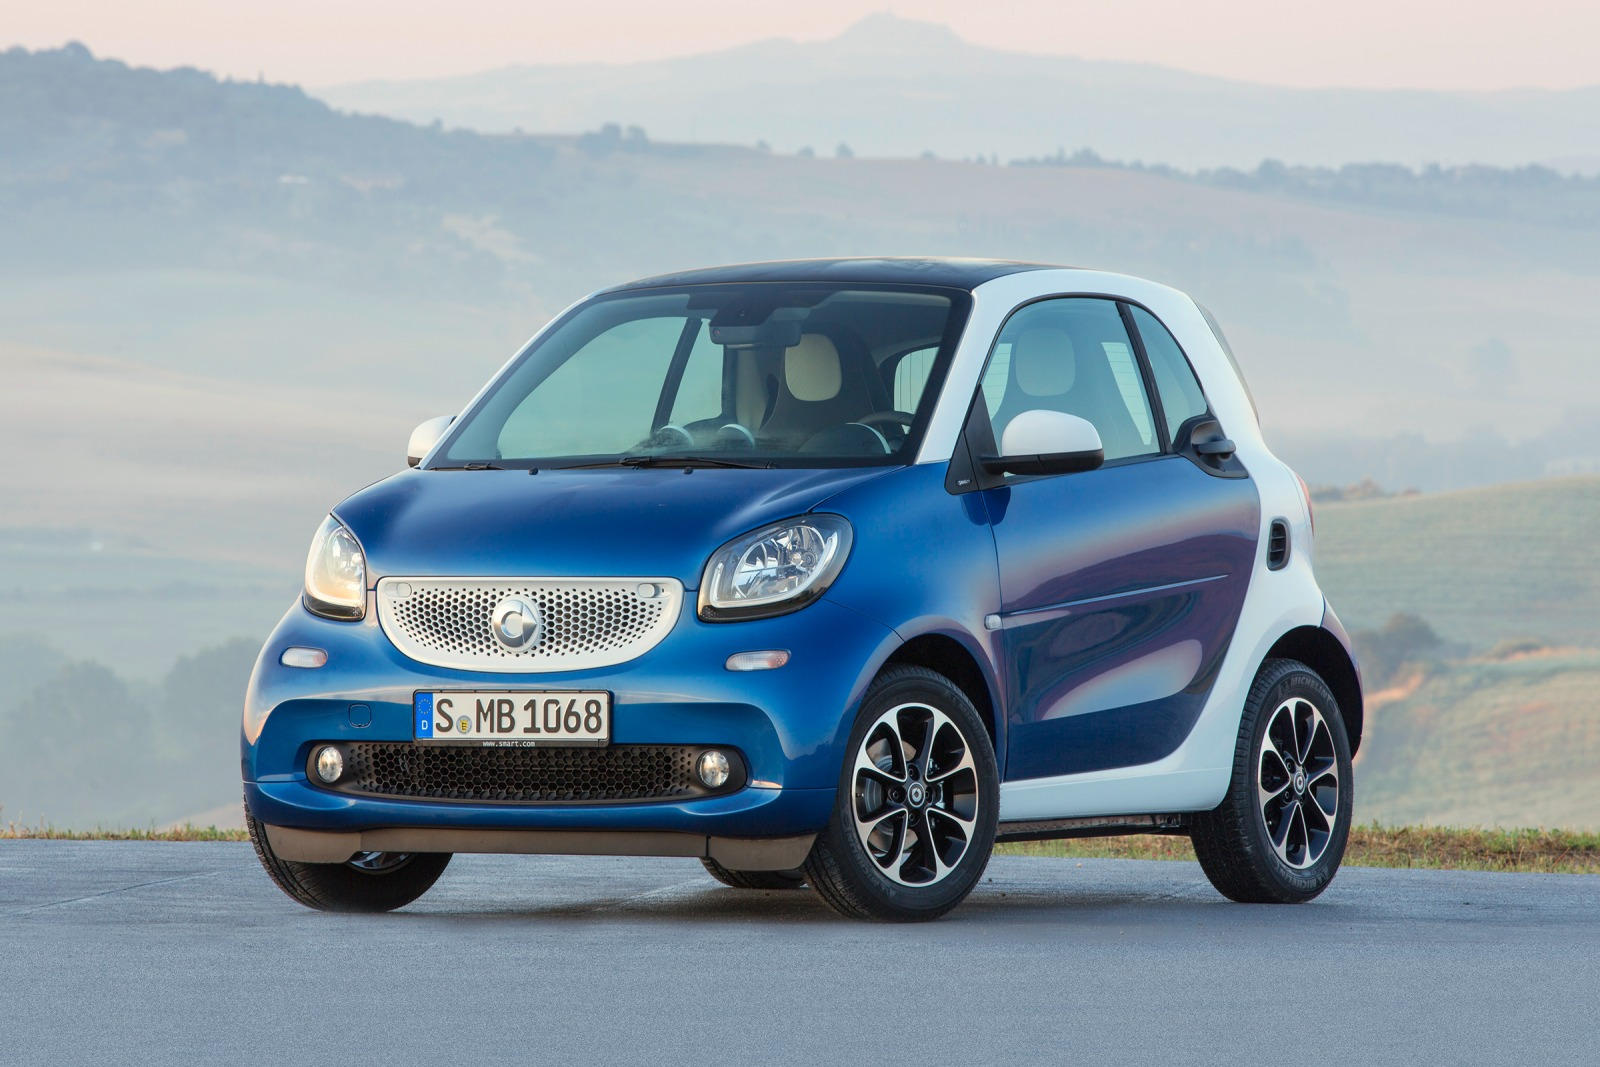 2017 smart fortwo: Review, Trims, Specs, Price, New Interior